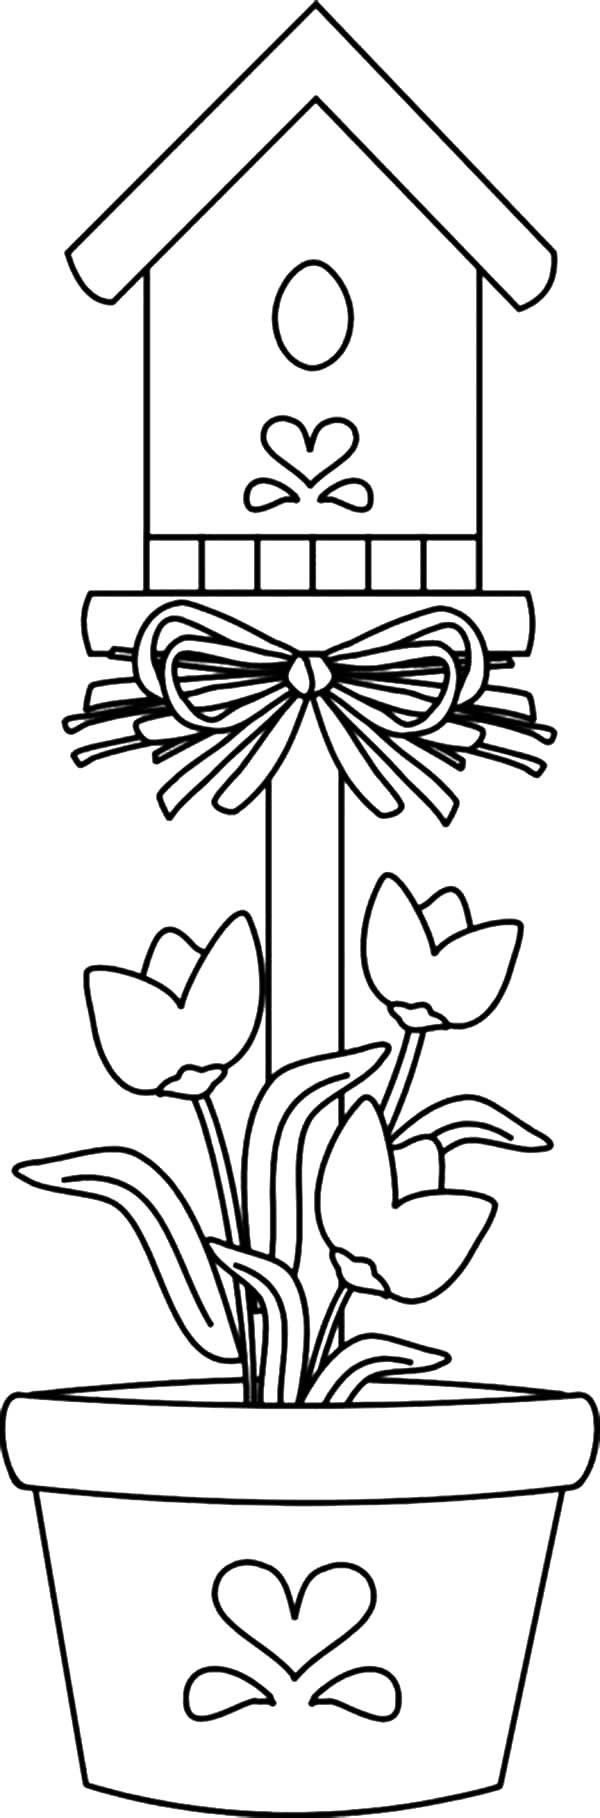 Birdhouse Coloring Pages 10